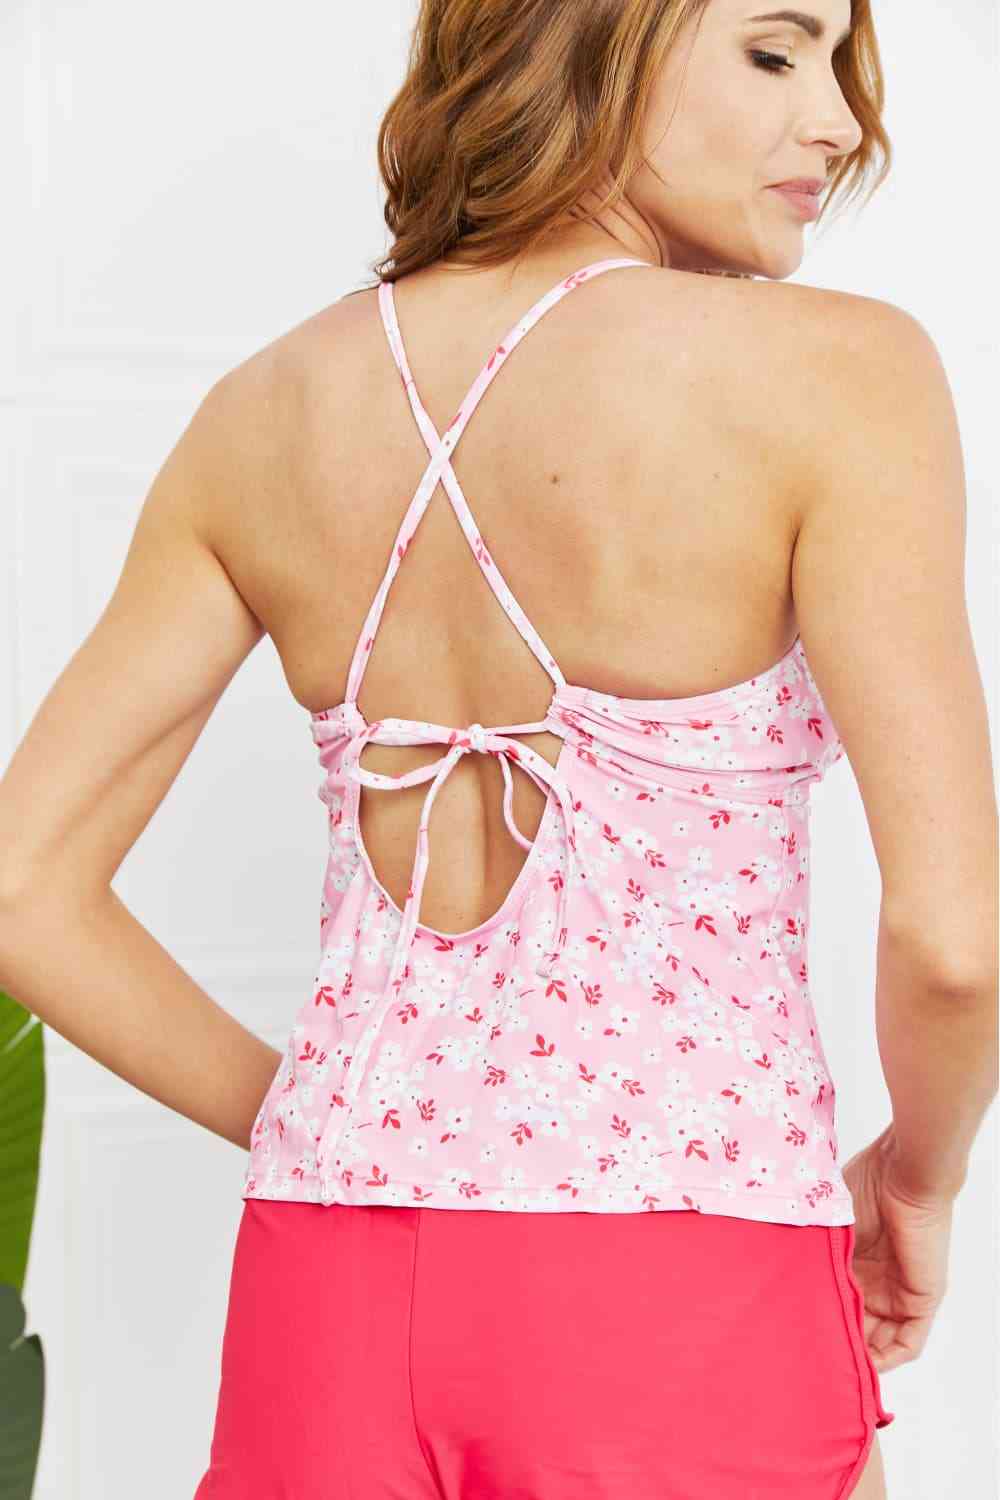 By The Shore Full Size Two-Piece Swimsuit in Blossom Pink - Swimsuits - Swimwear - 13 - 2024